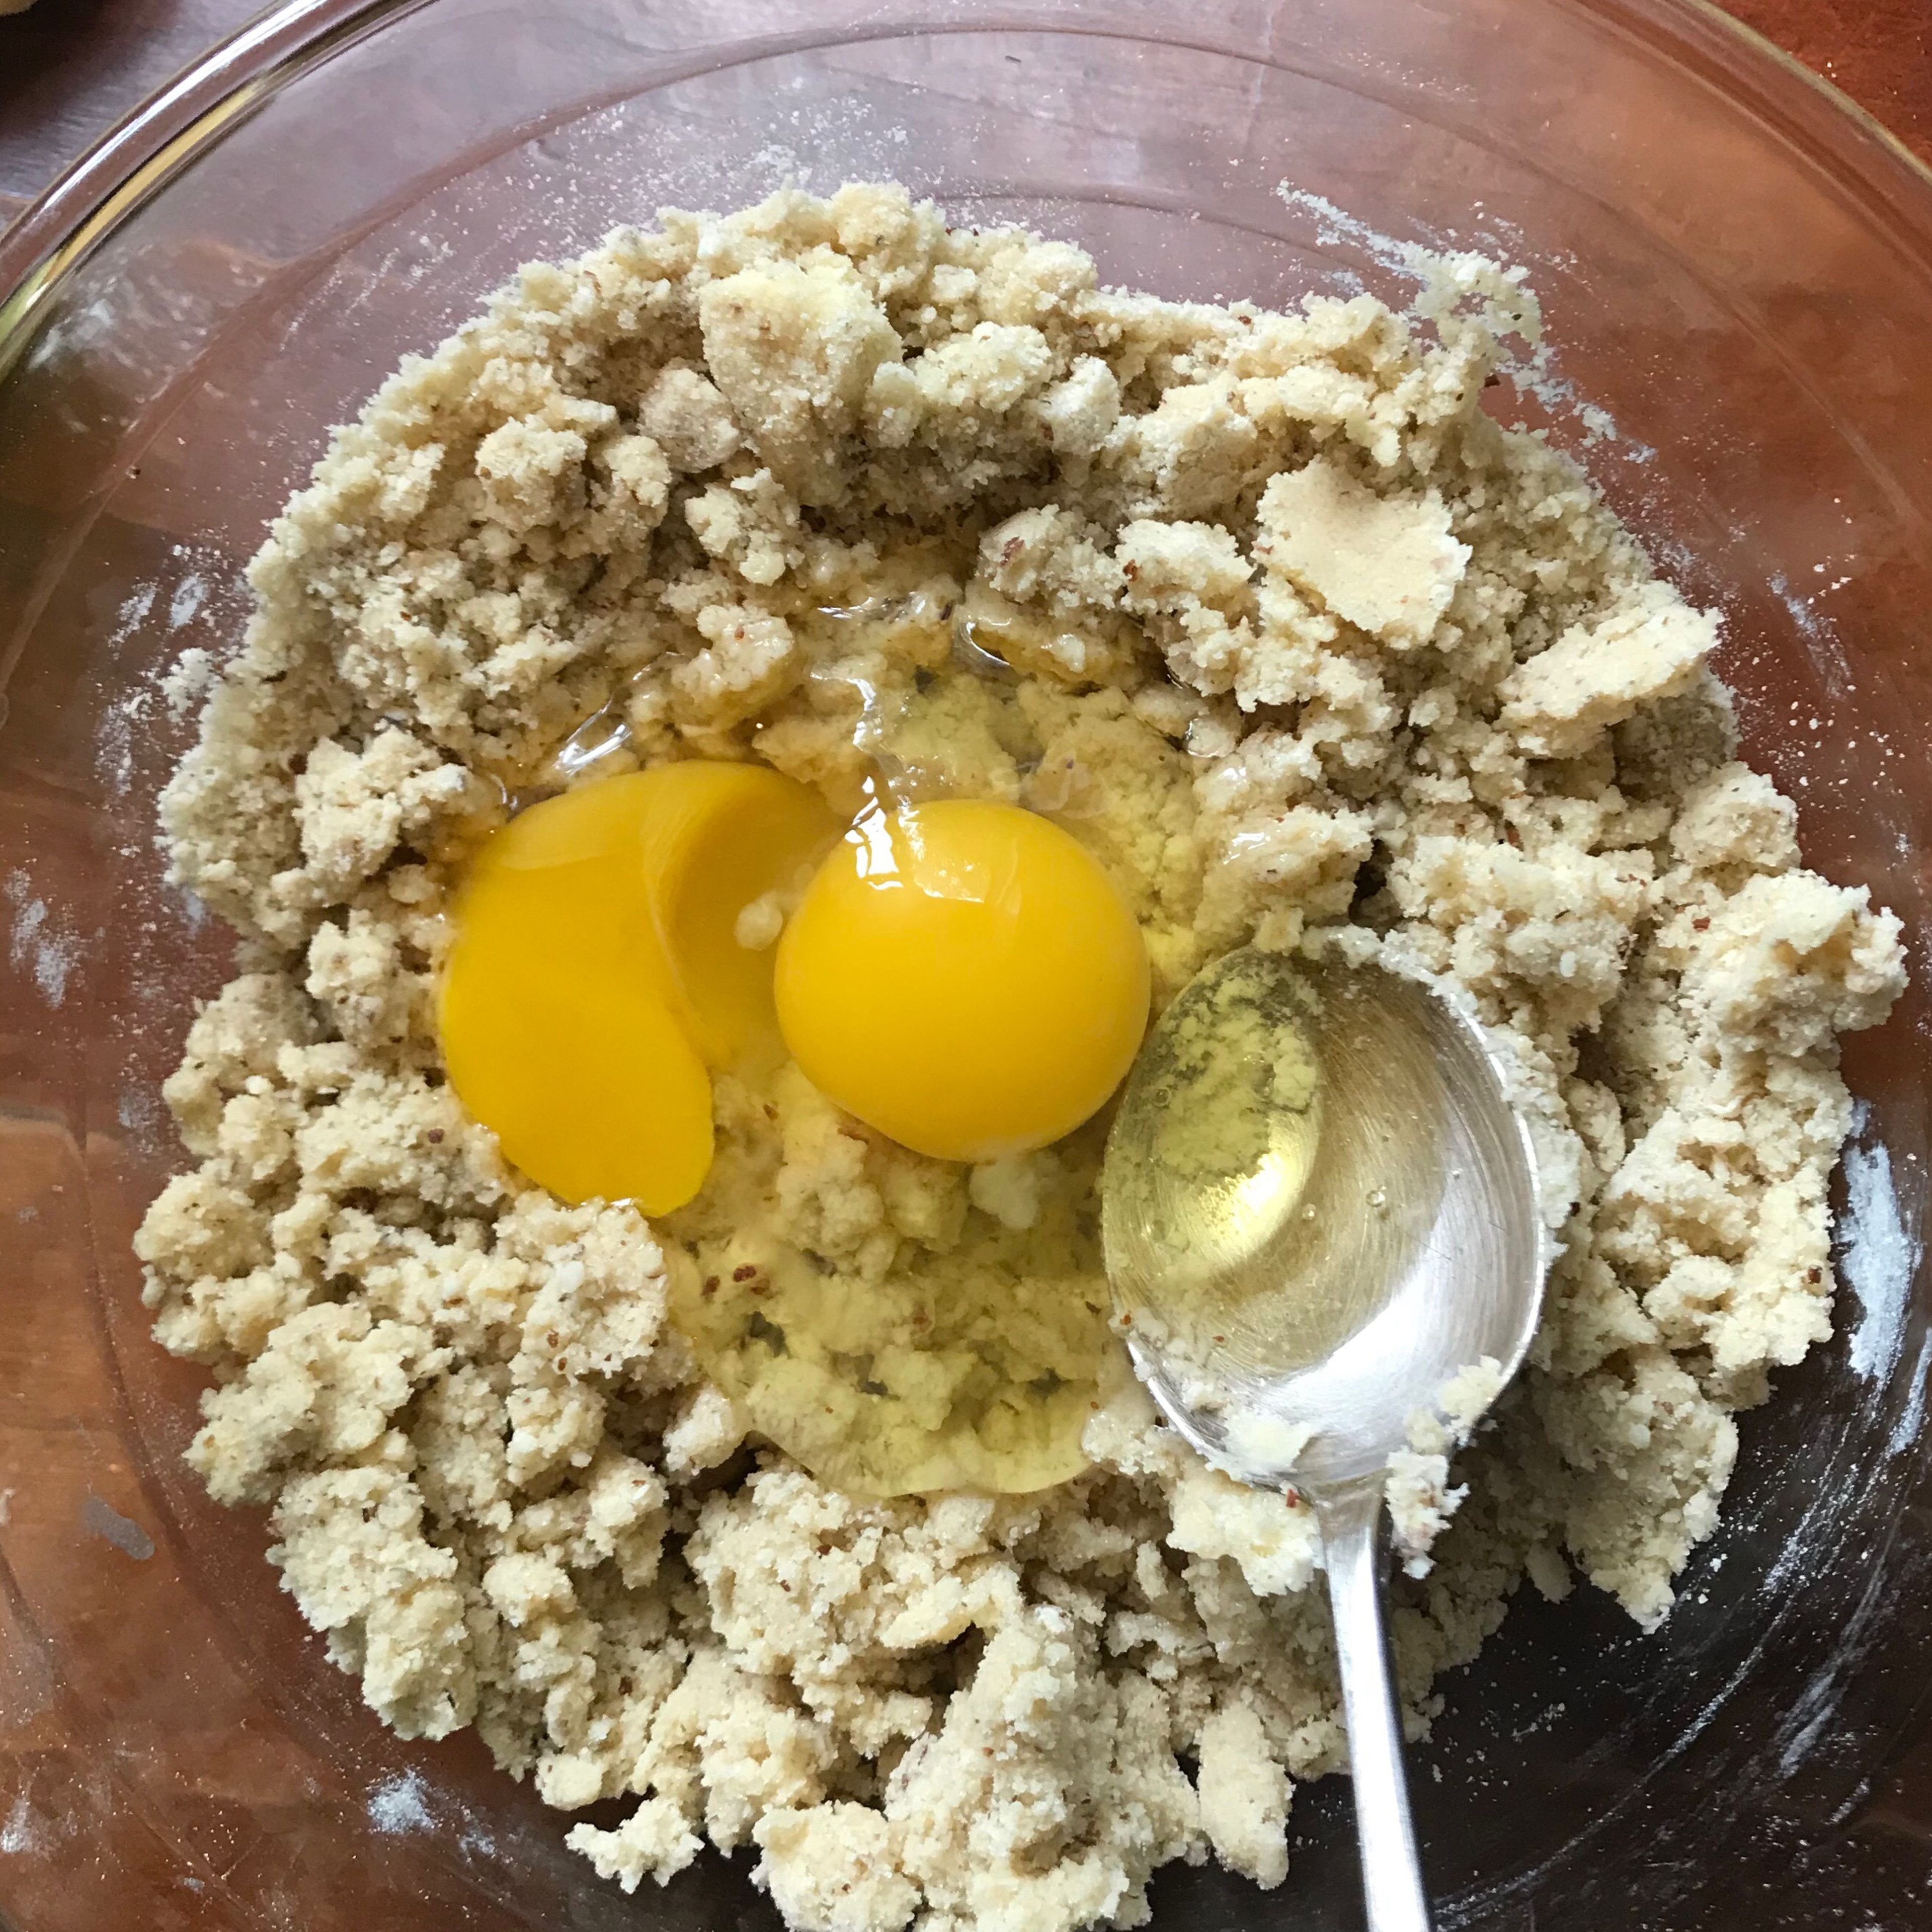 Break the eggs and mix with the spoon